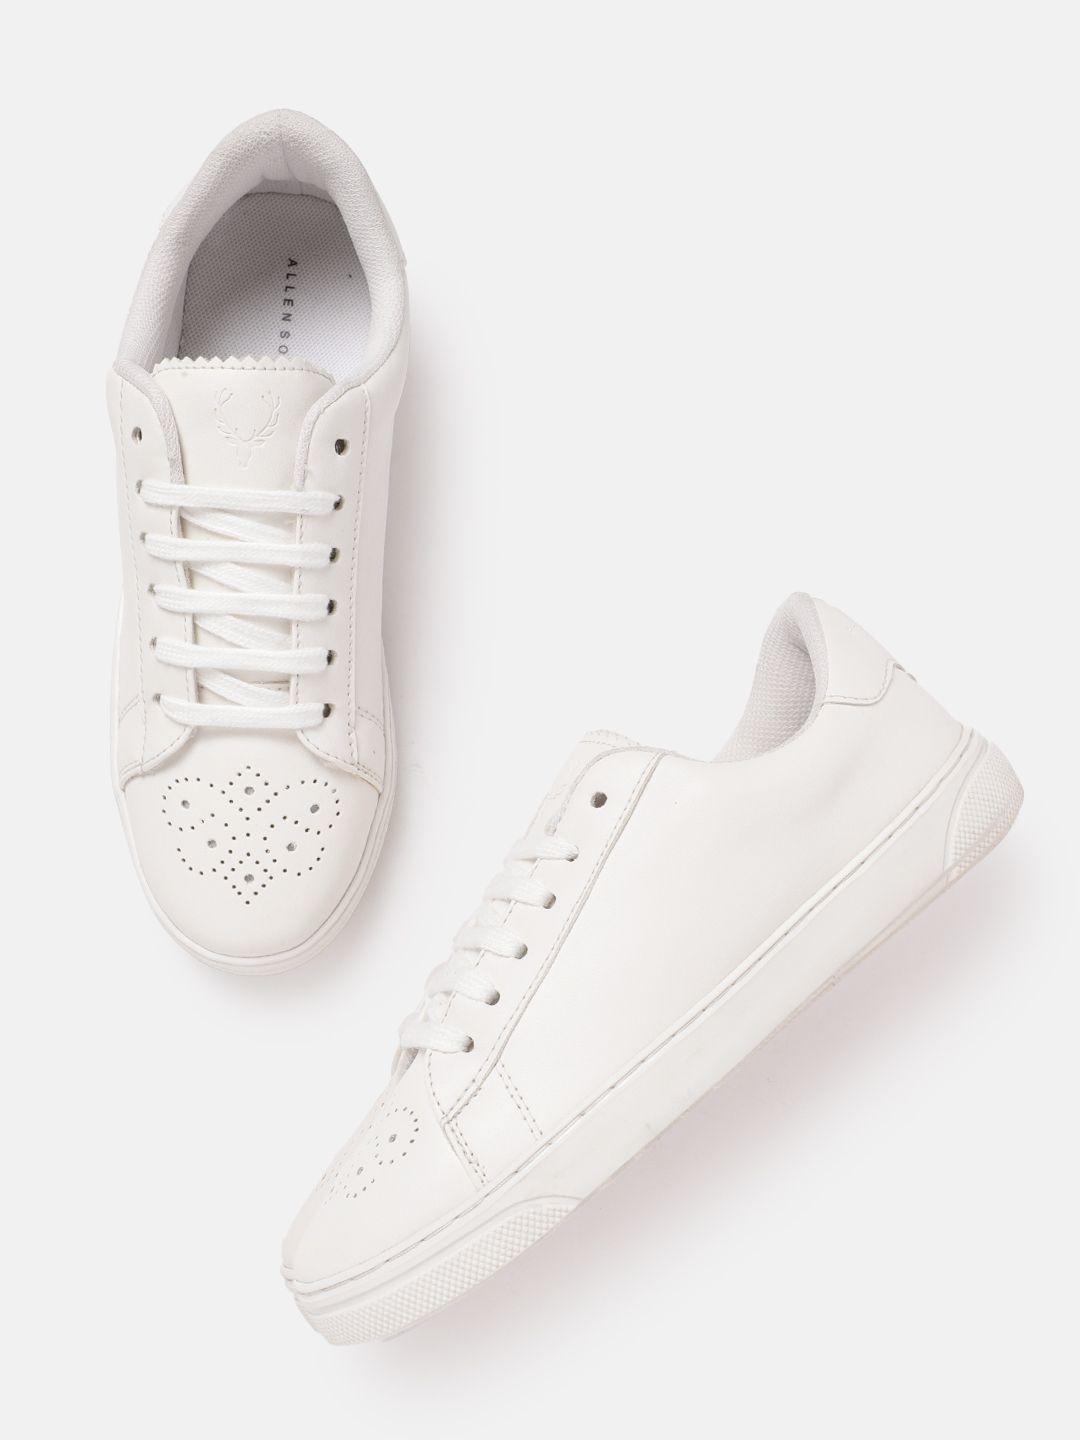 allen solly women perforated sneakers